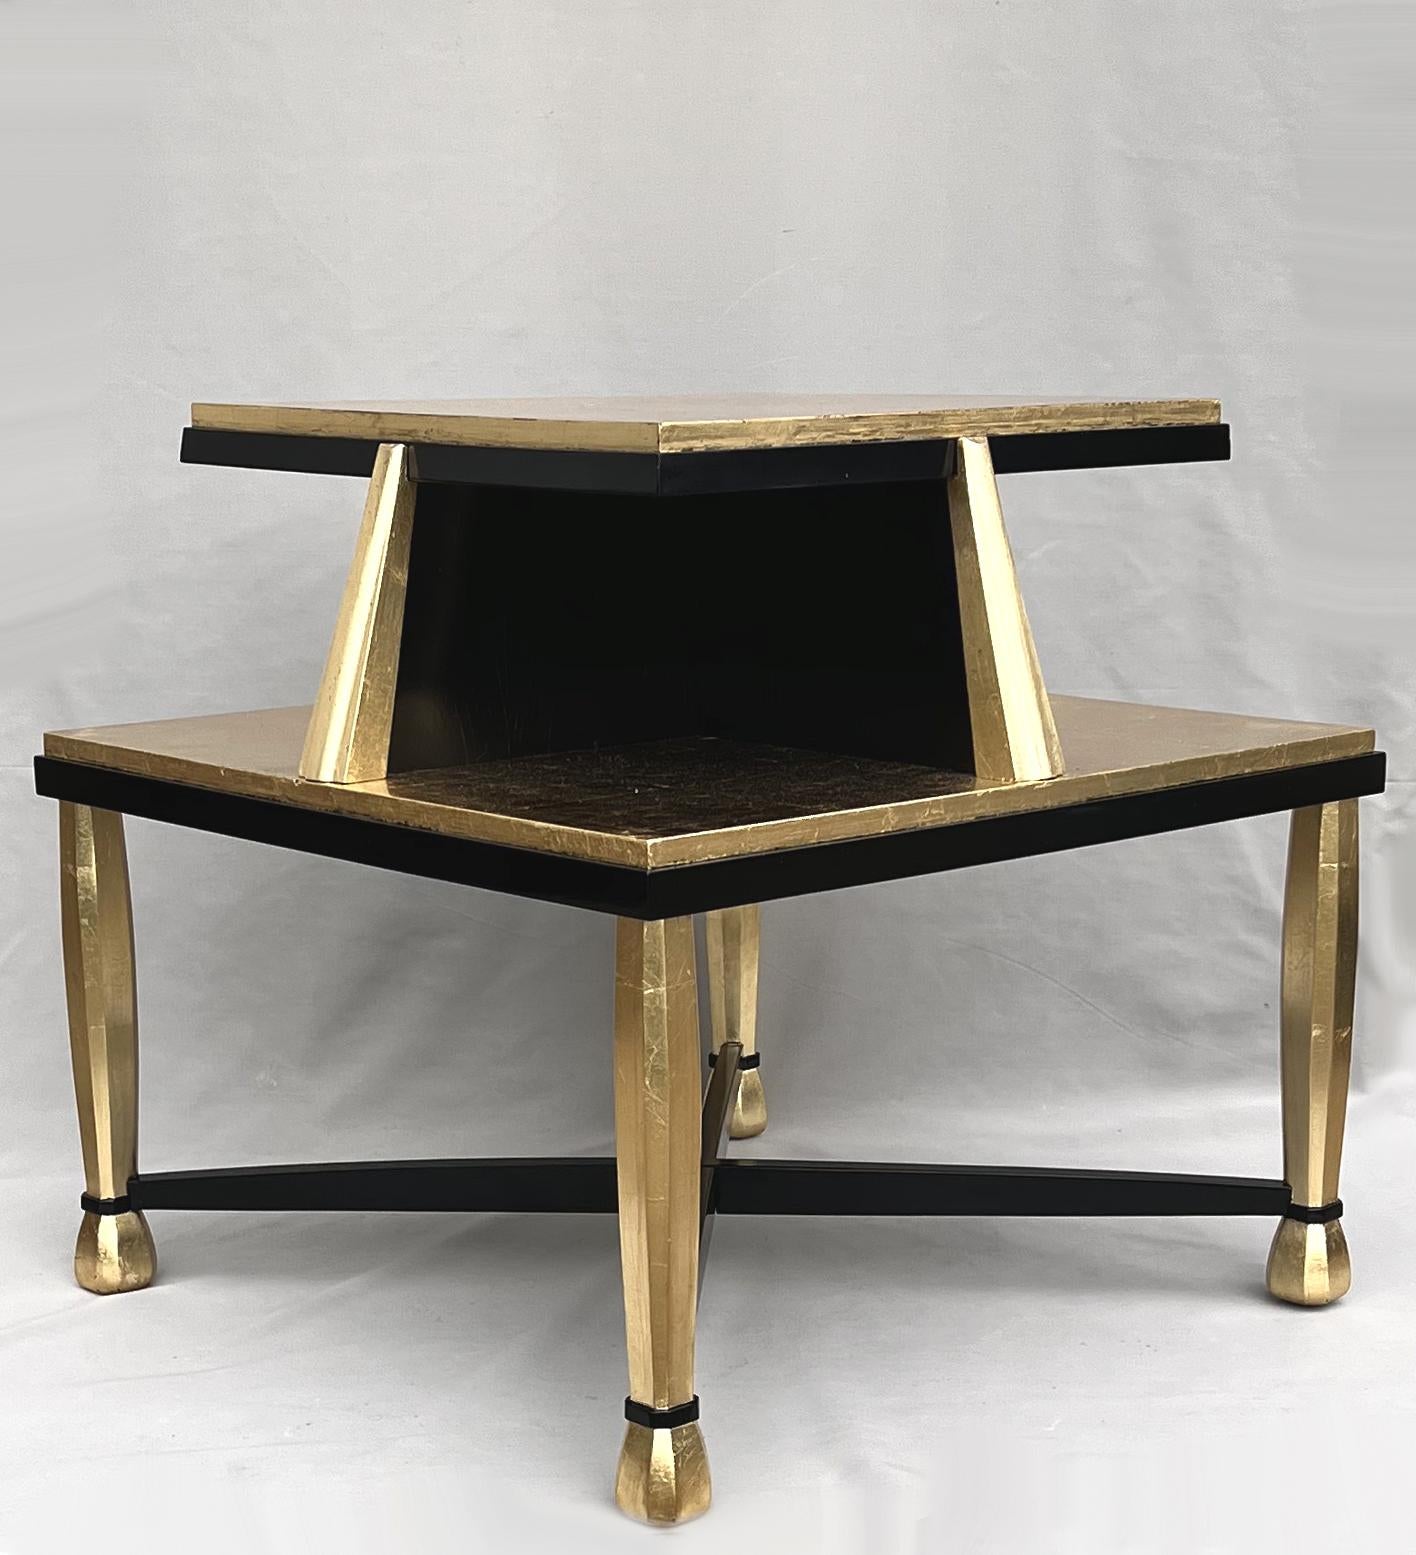 Art Deco Coffee Table in Giltwood and Black Lacquer, 1930s For Sale 1